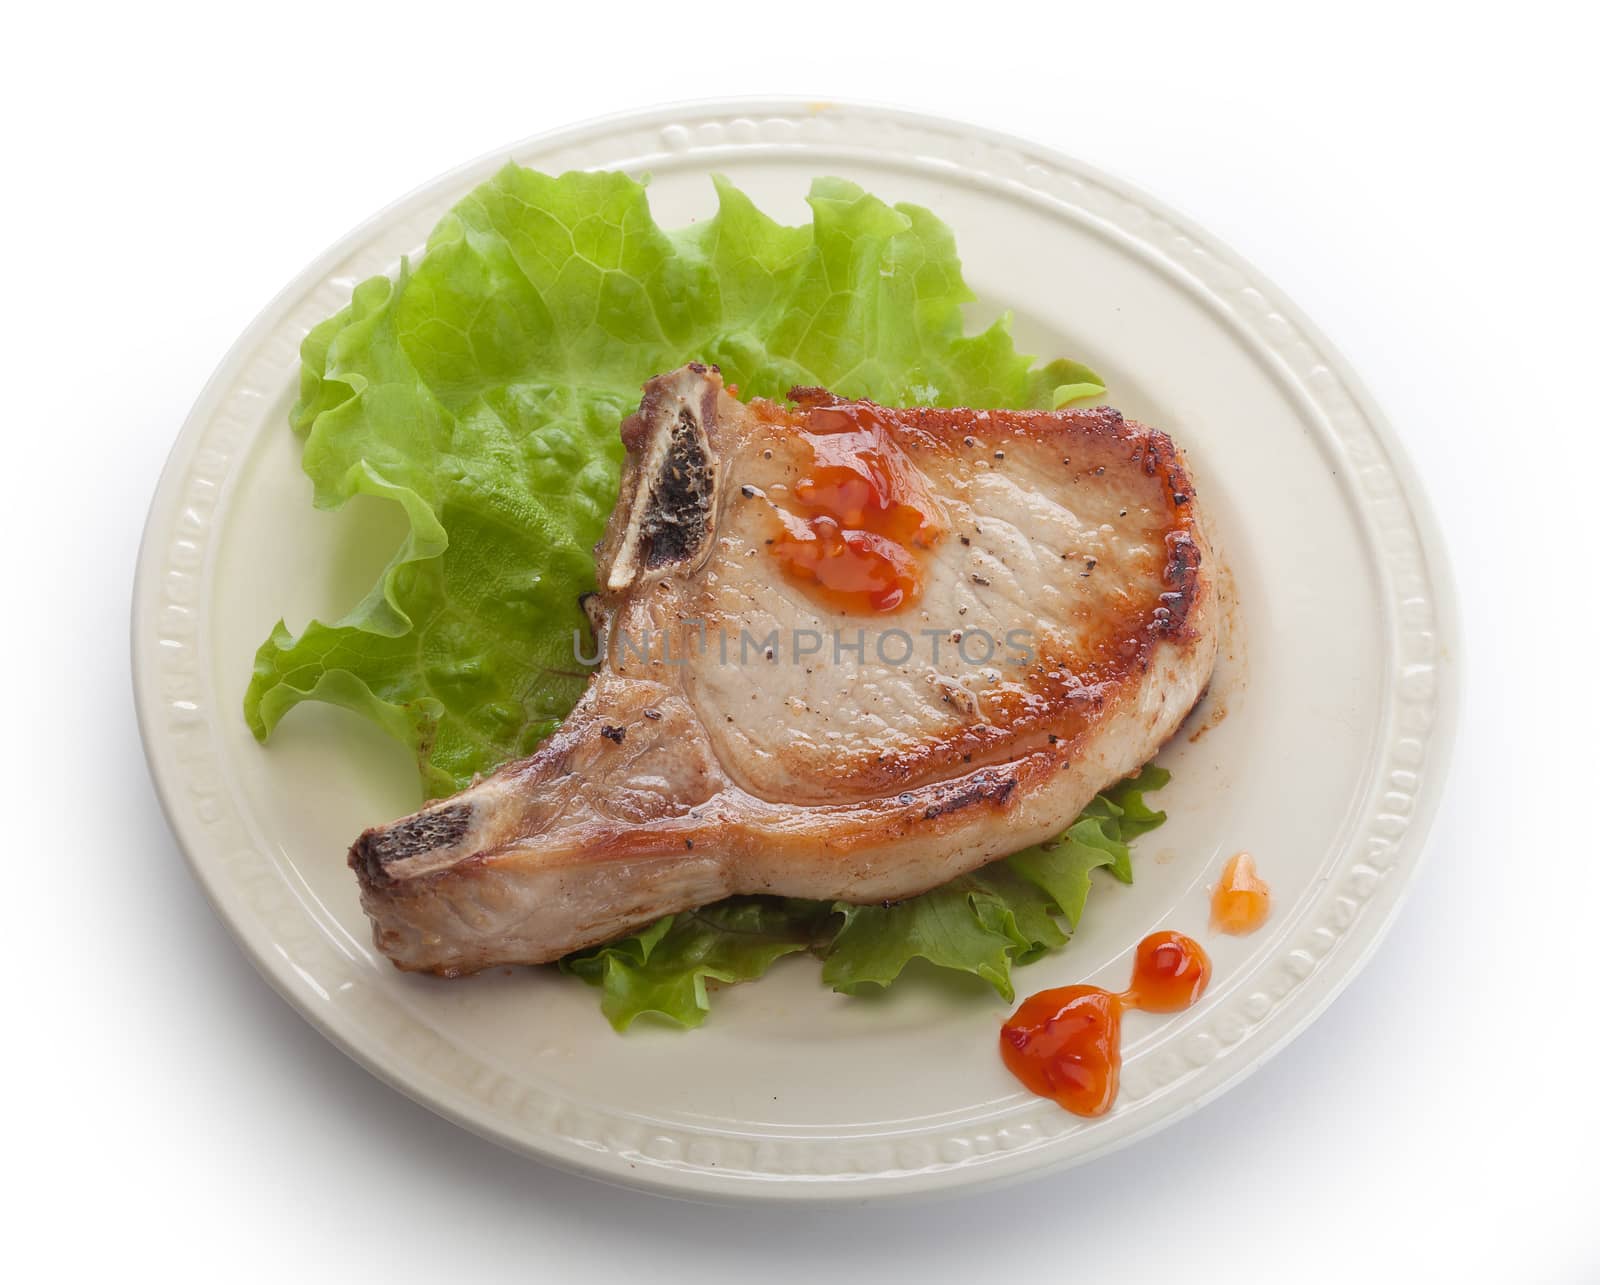 Fried pork cutlet with fresh green lettuce on the plate